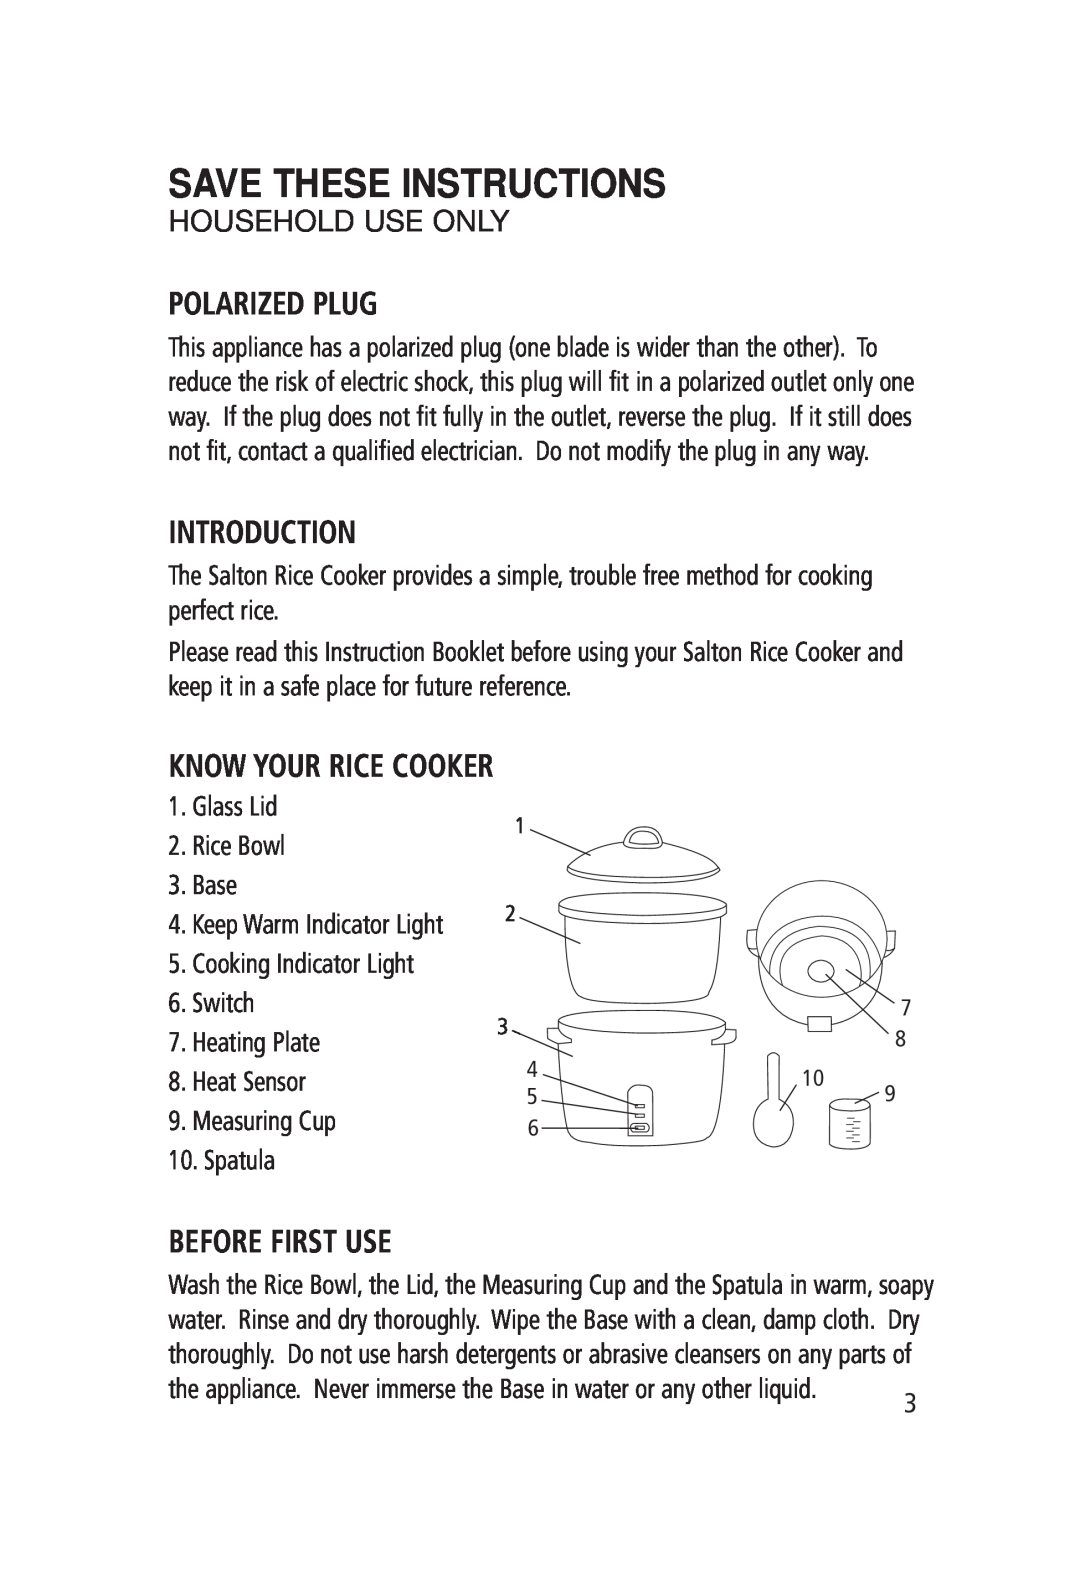 Salton RC-1211 manual Polarized Plug, Introduction, Know Your Rice Cooker, Before First Use, Save These Instructions 